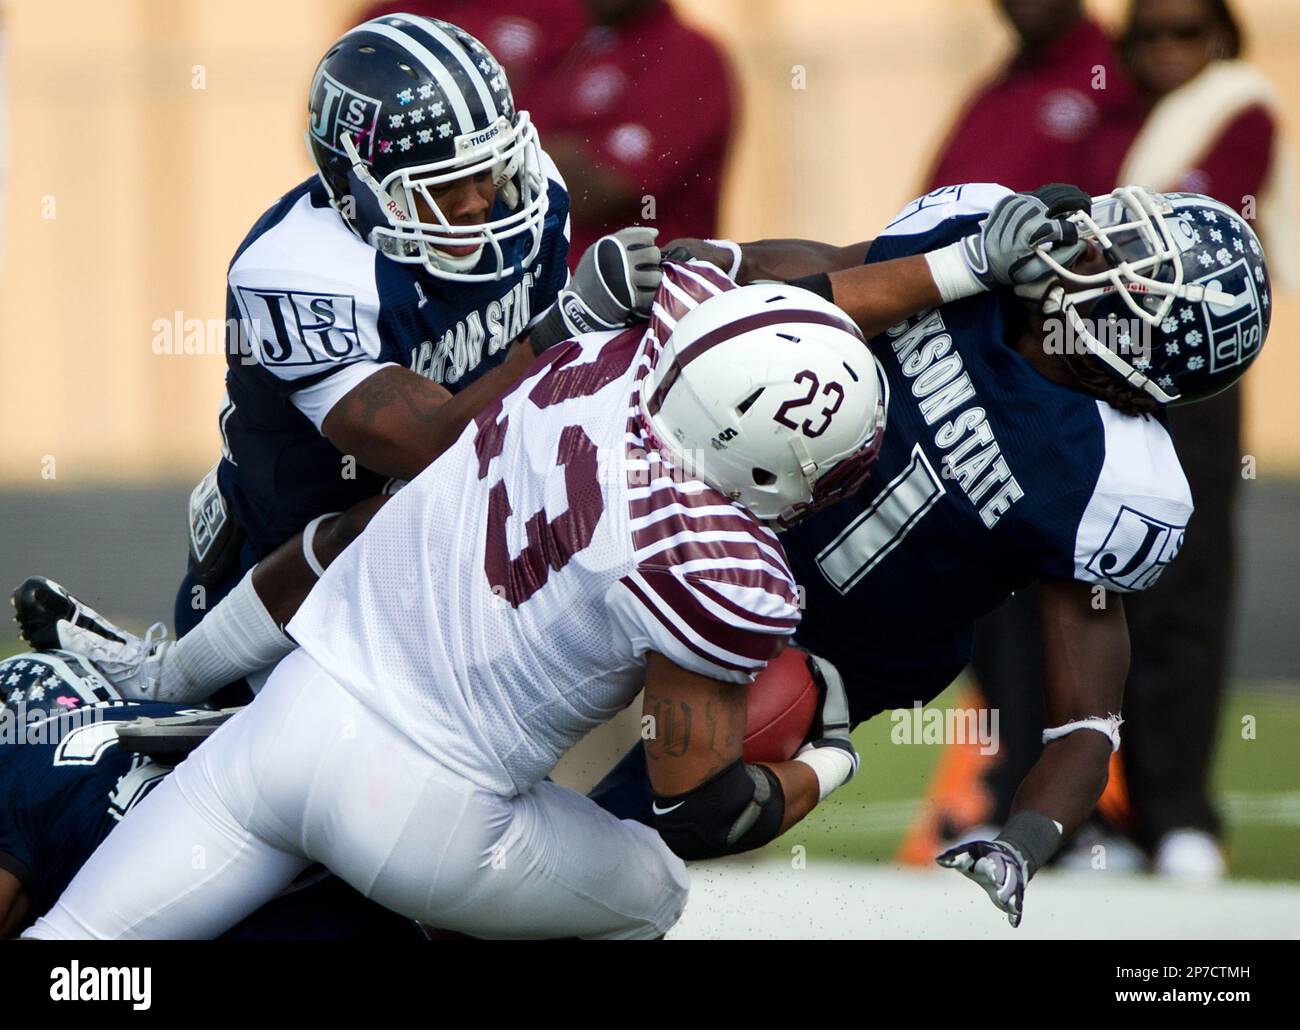 Texas Southern running back Marcus Wright (23) grabs the face mask